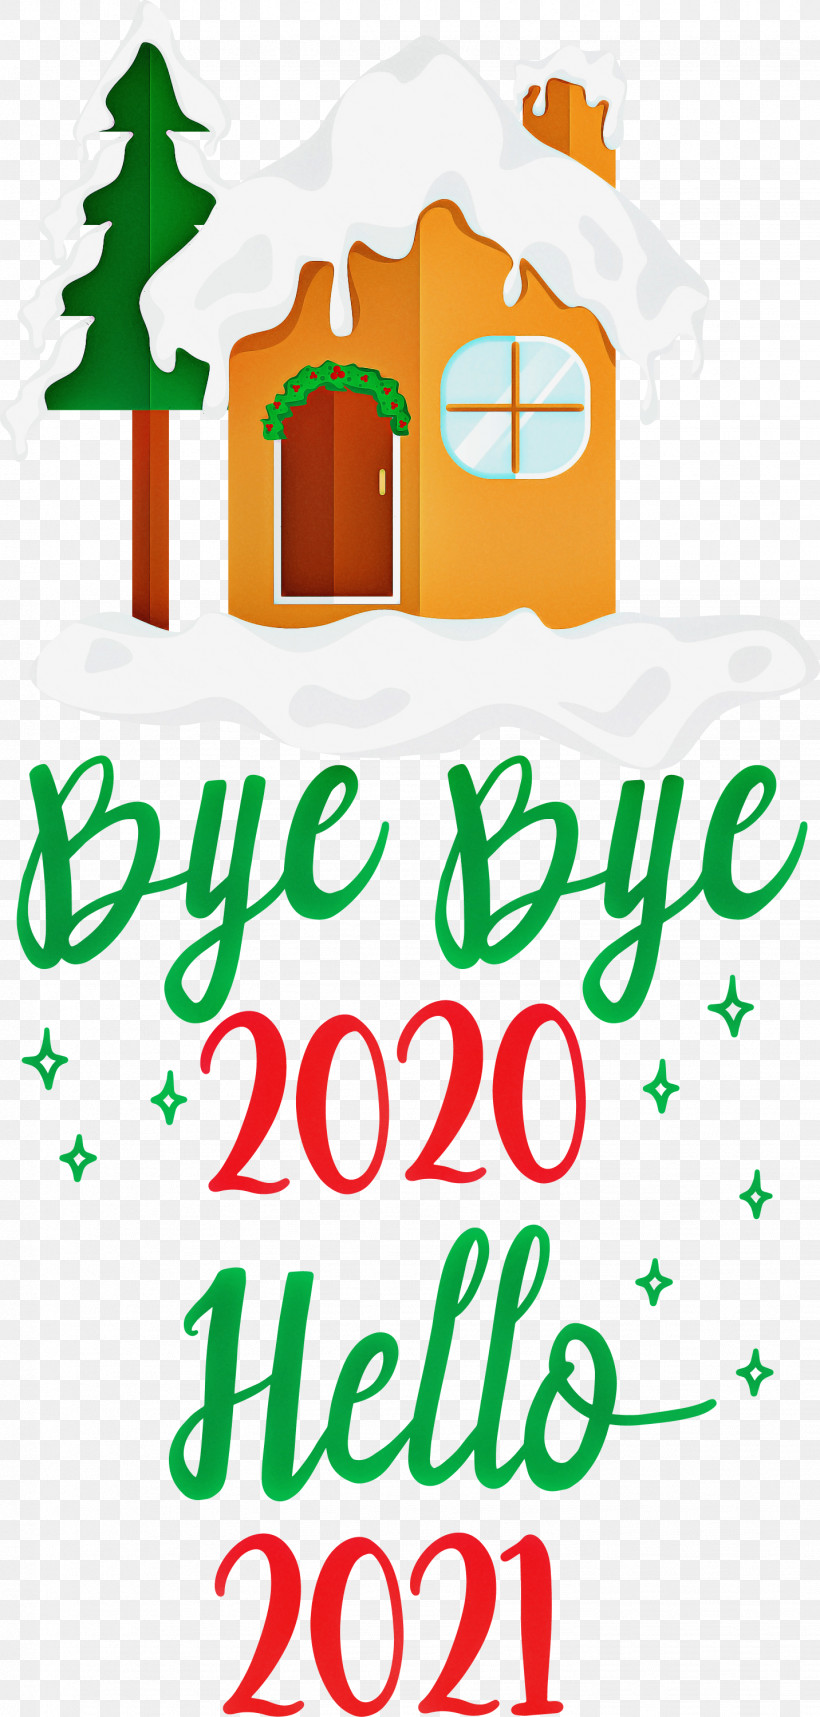 Hello 2021 Year Bye Bye 2020 Year, PNG, 1432x3000px, Hello 2021 Year, Abstract Art, Bye Bye 2020 Year, Cartoon, Christmas Day Download Free